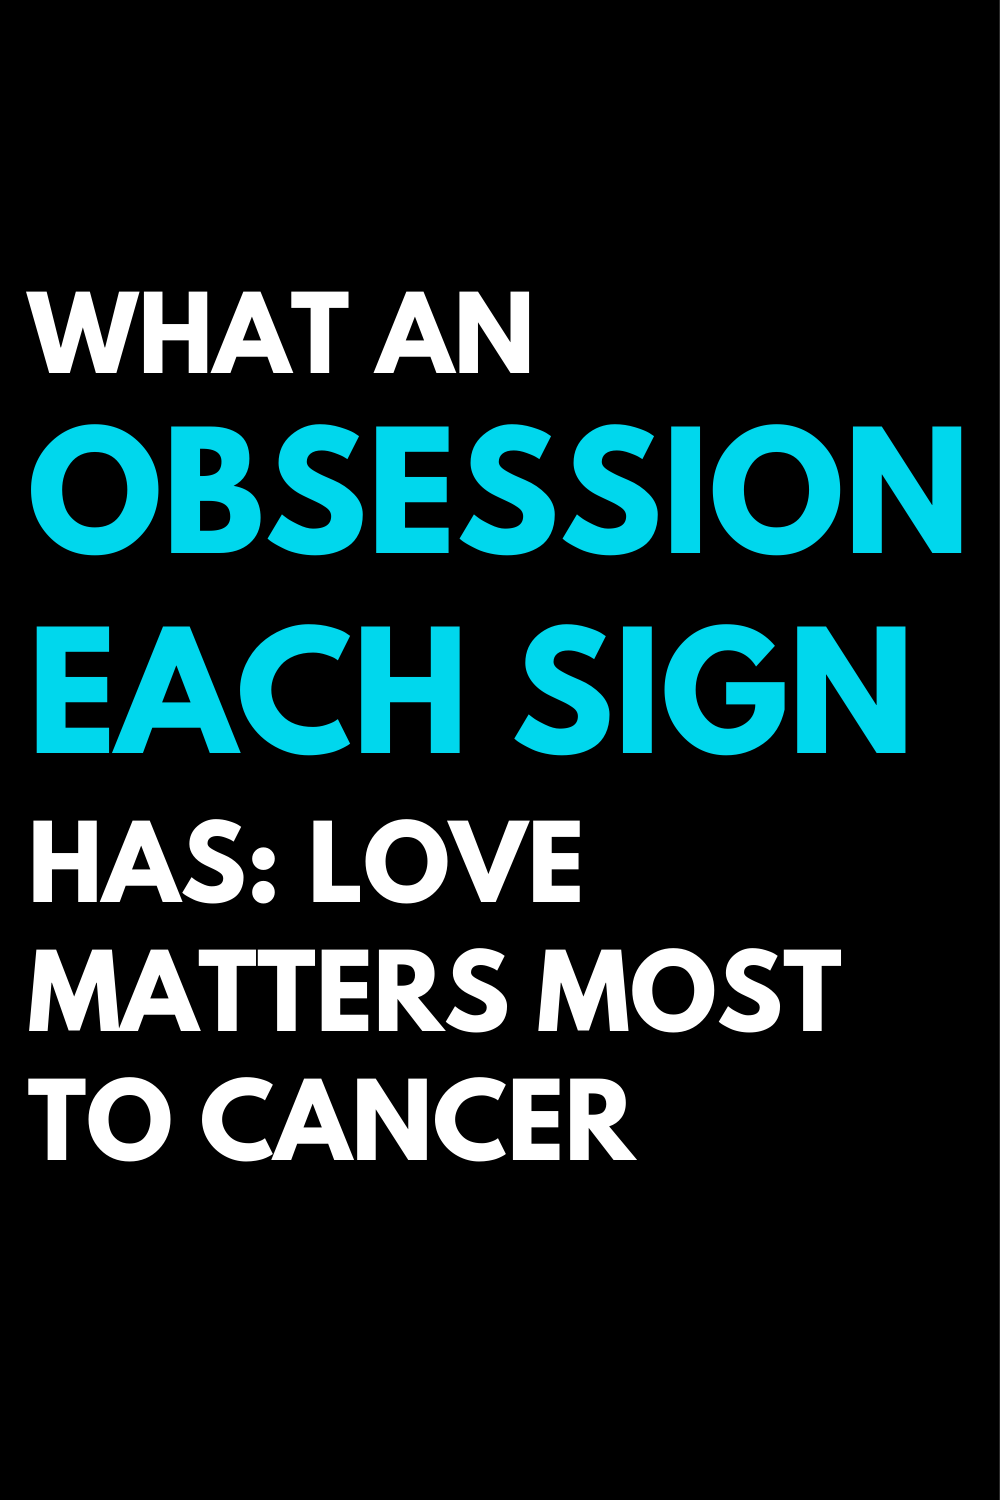 What an obsession each sign has: Love matters most to Cancer